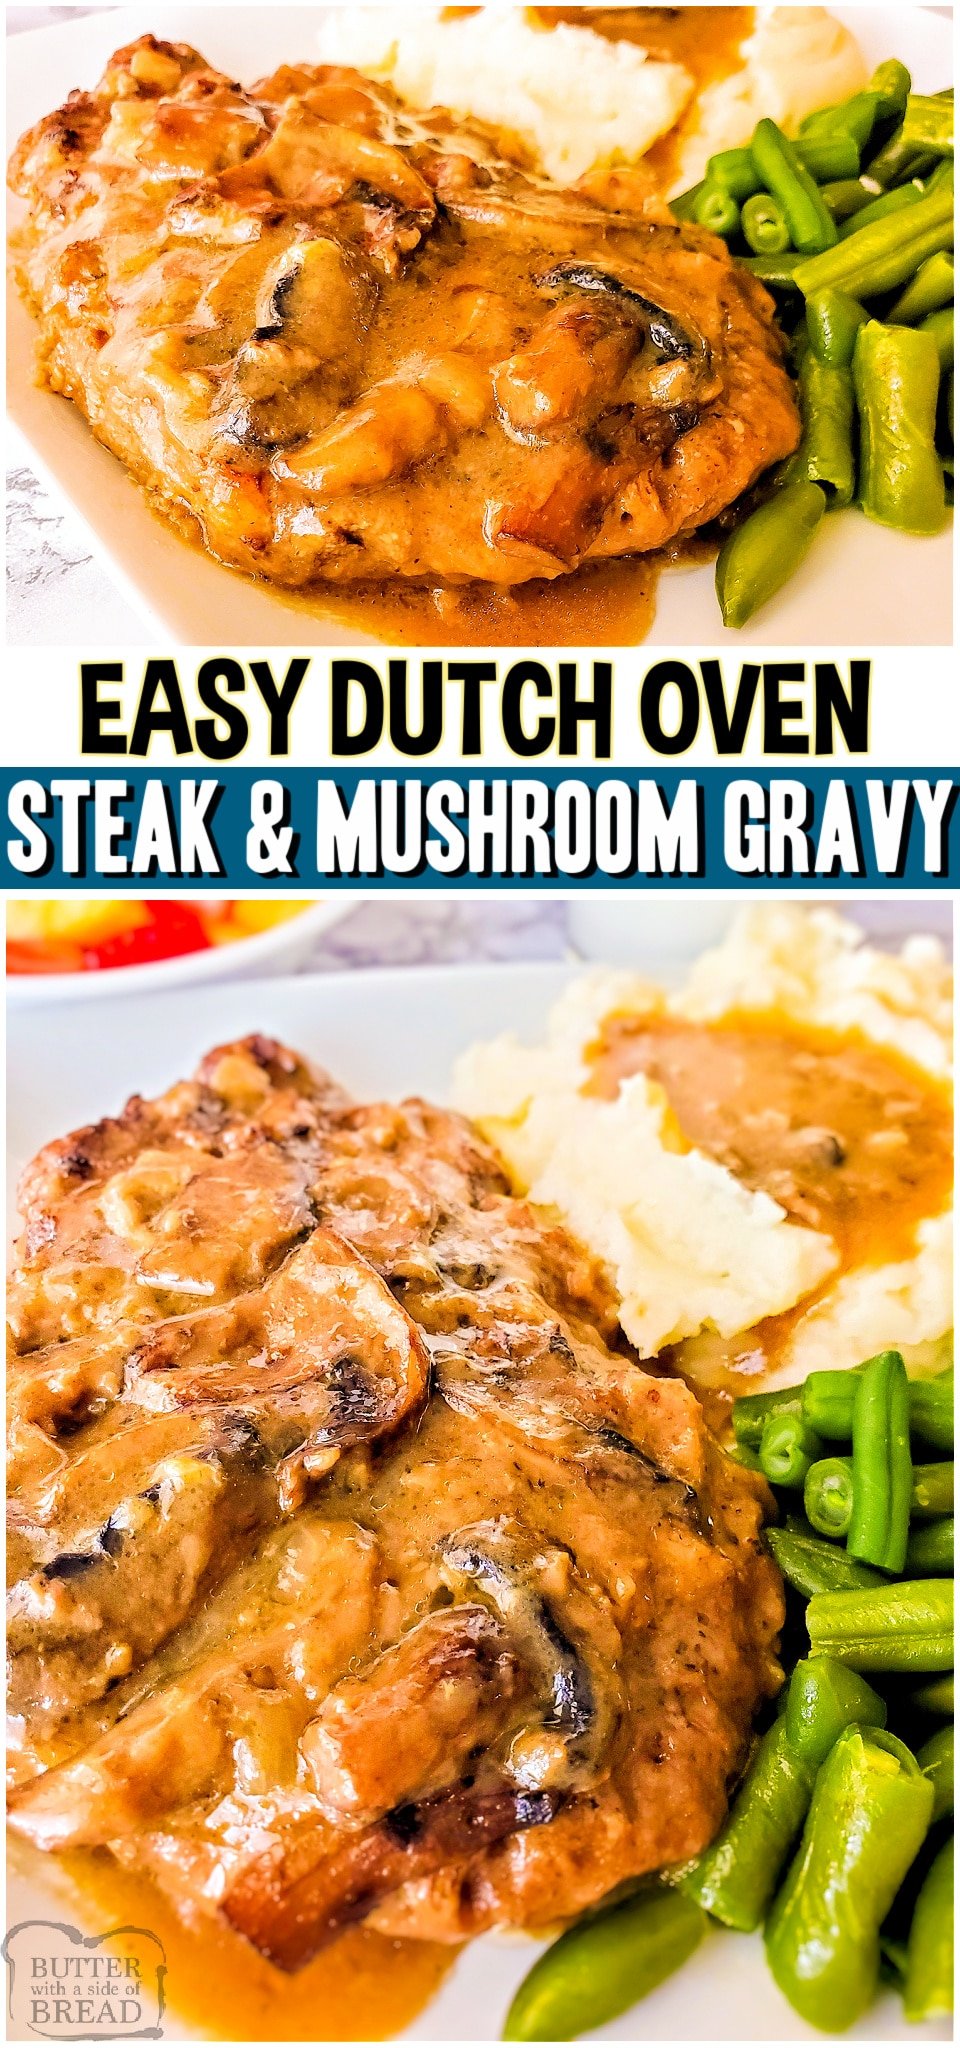 Dutch Oven Cube Steak & Gravy is a flavorful, tender cube steak recipe made with simple ingredients. Serve it up with mashed potatoes for a delicious & comforting dinner recipe.